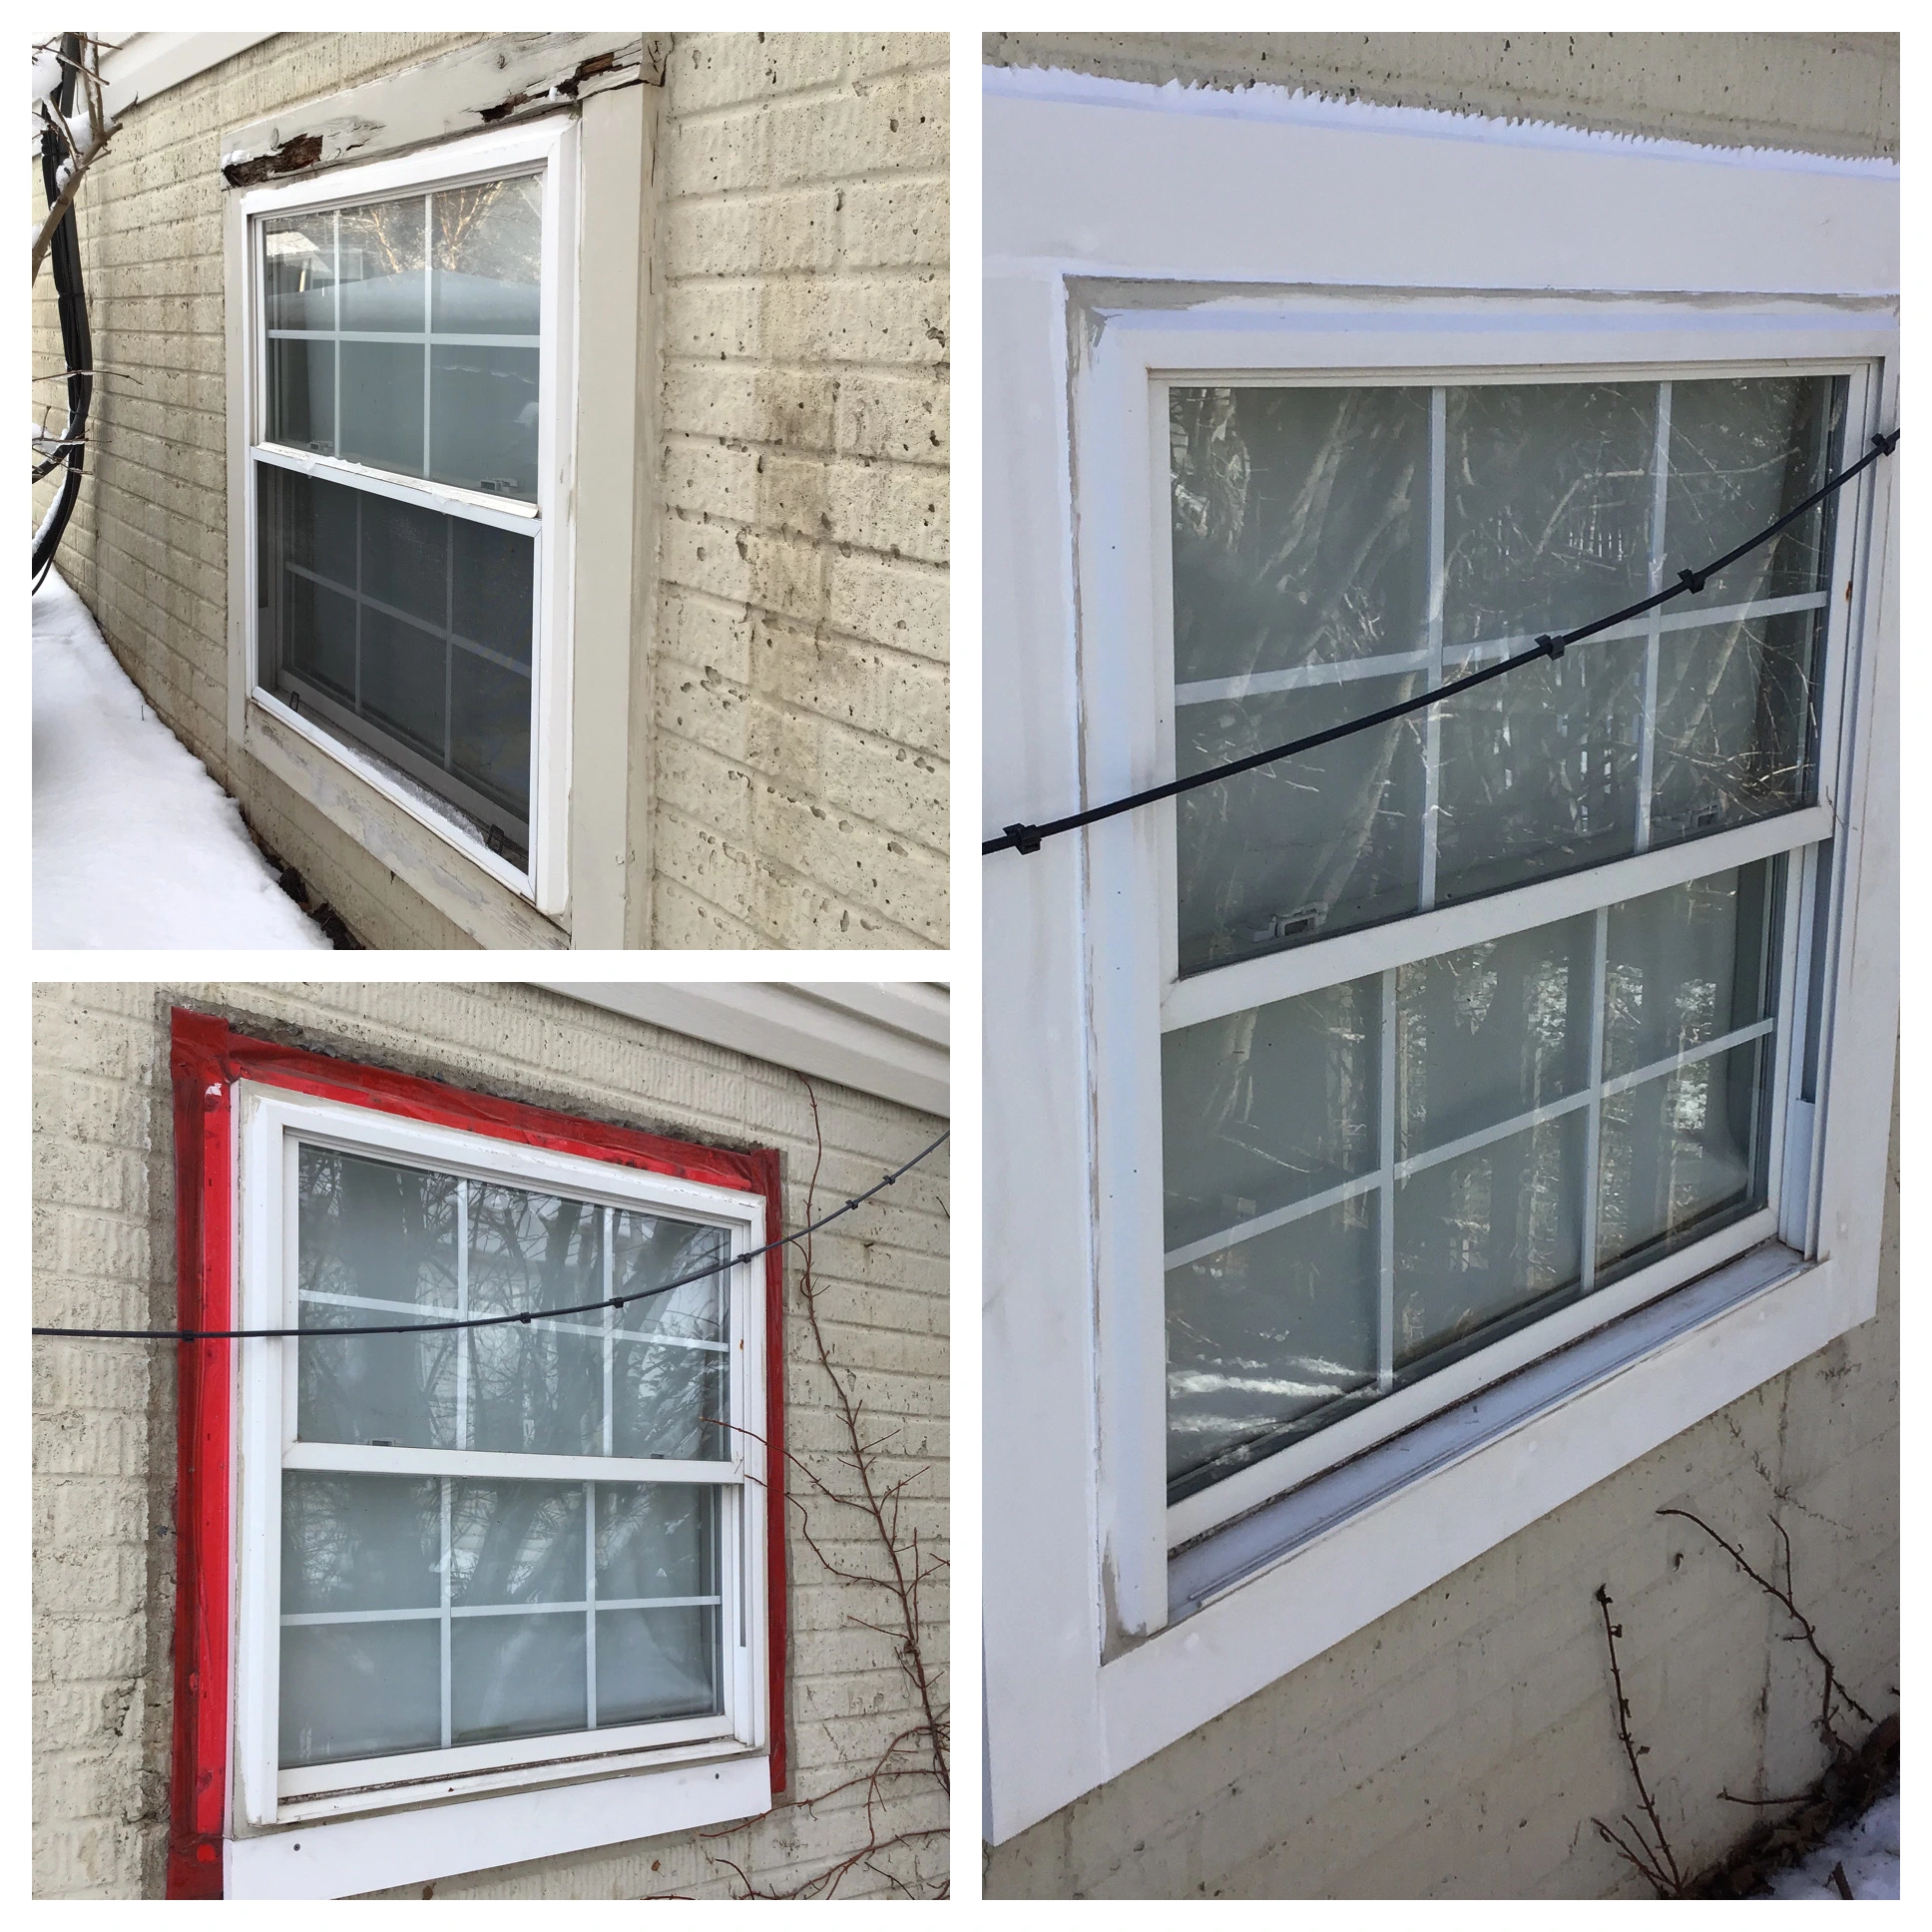 A window on the outside of a home before and after the frame surrounding it has been replaced by Mr. Handyman.